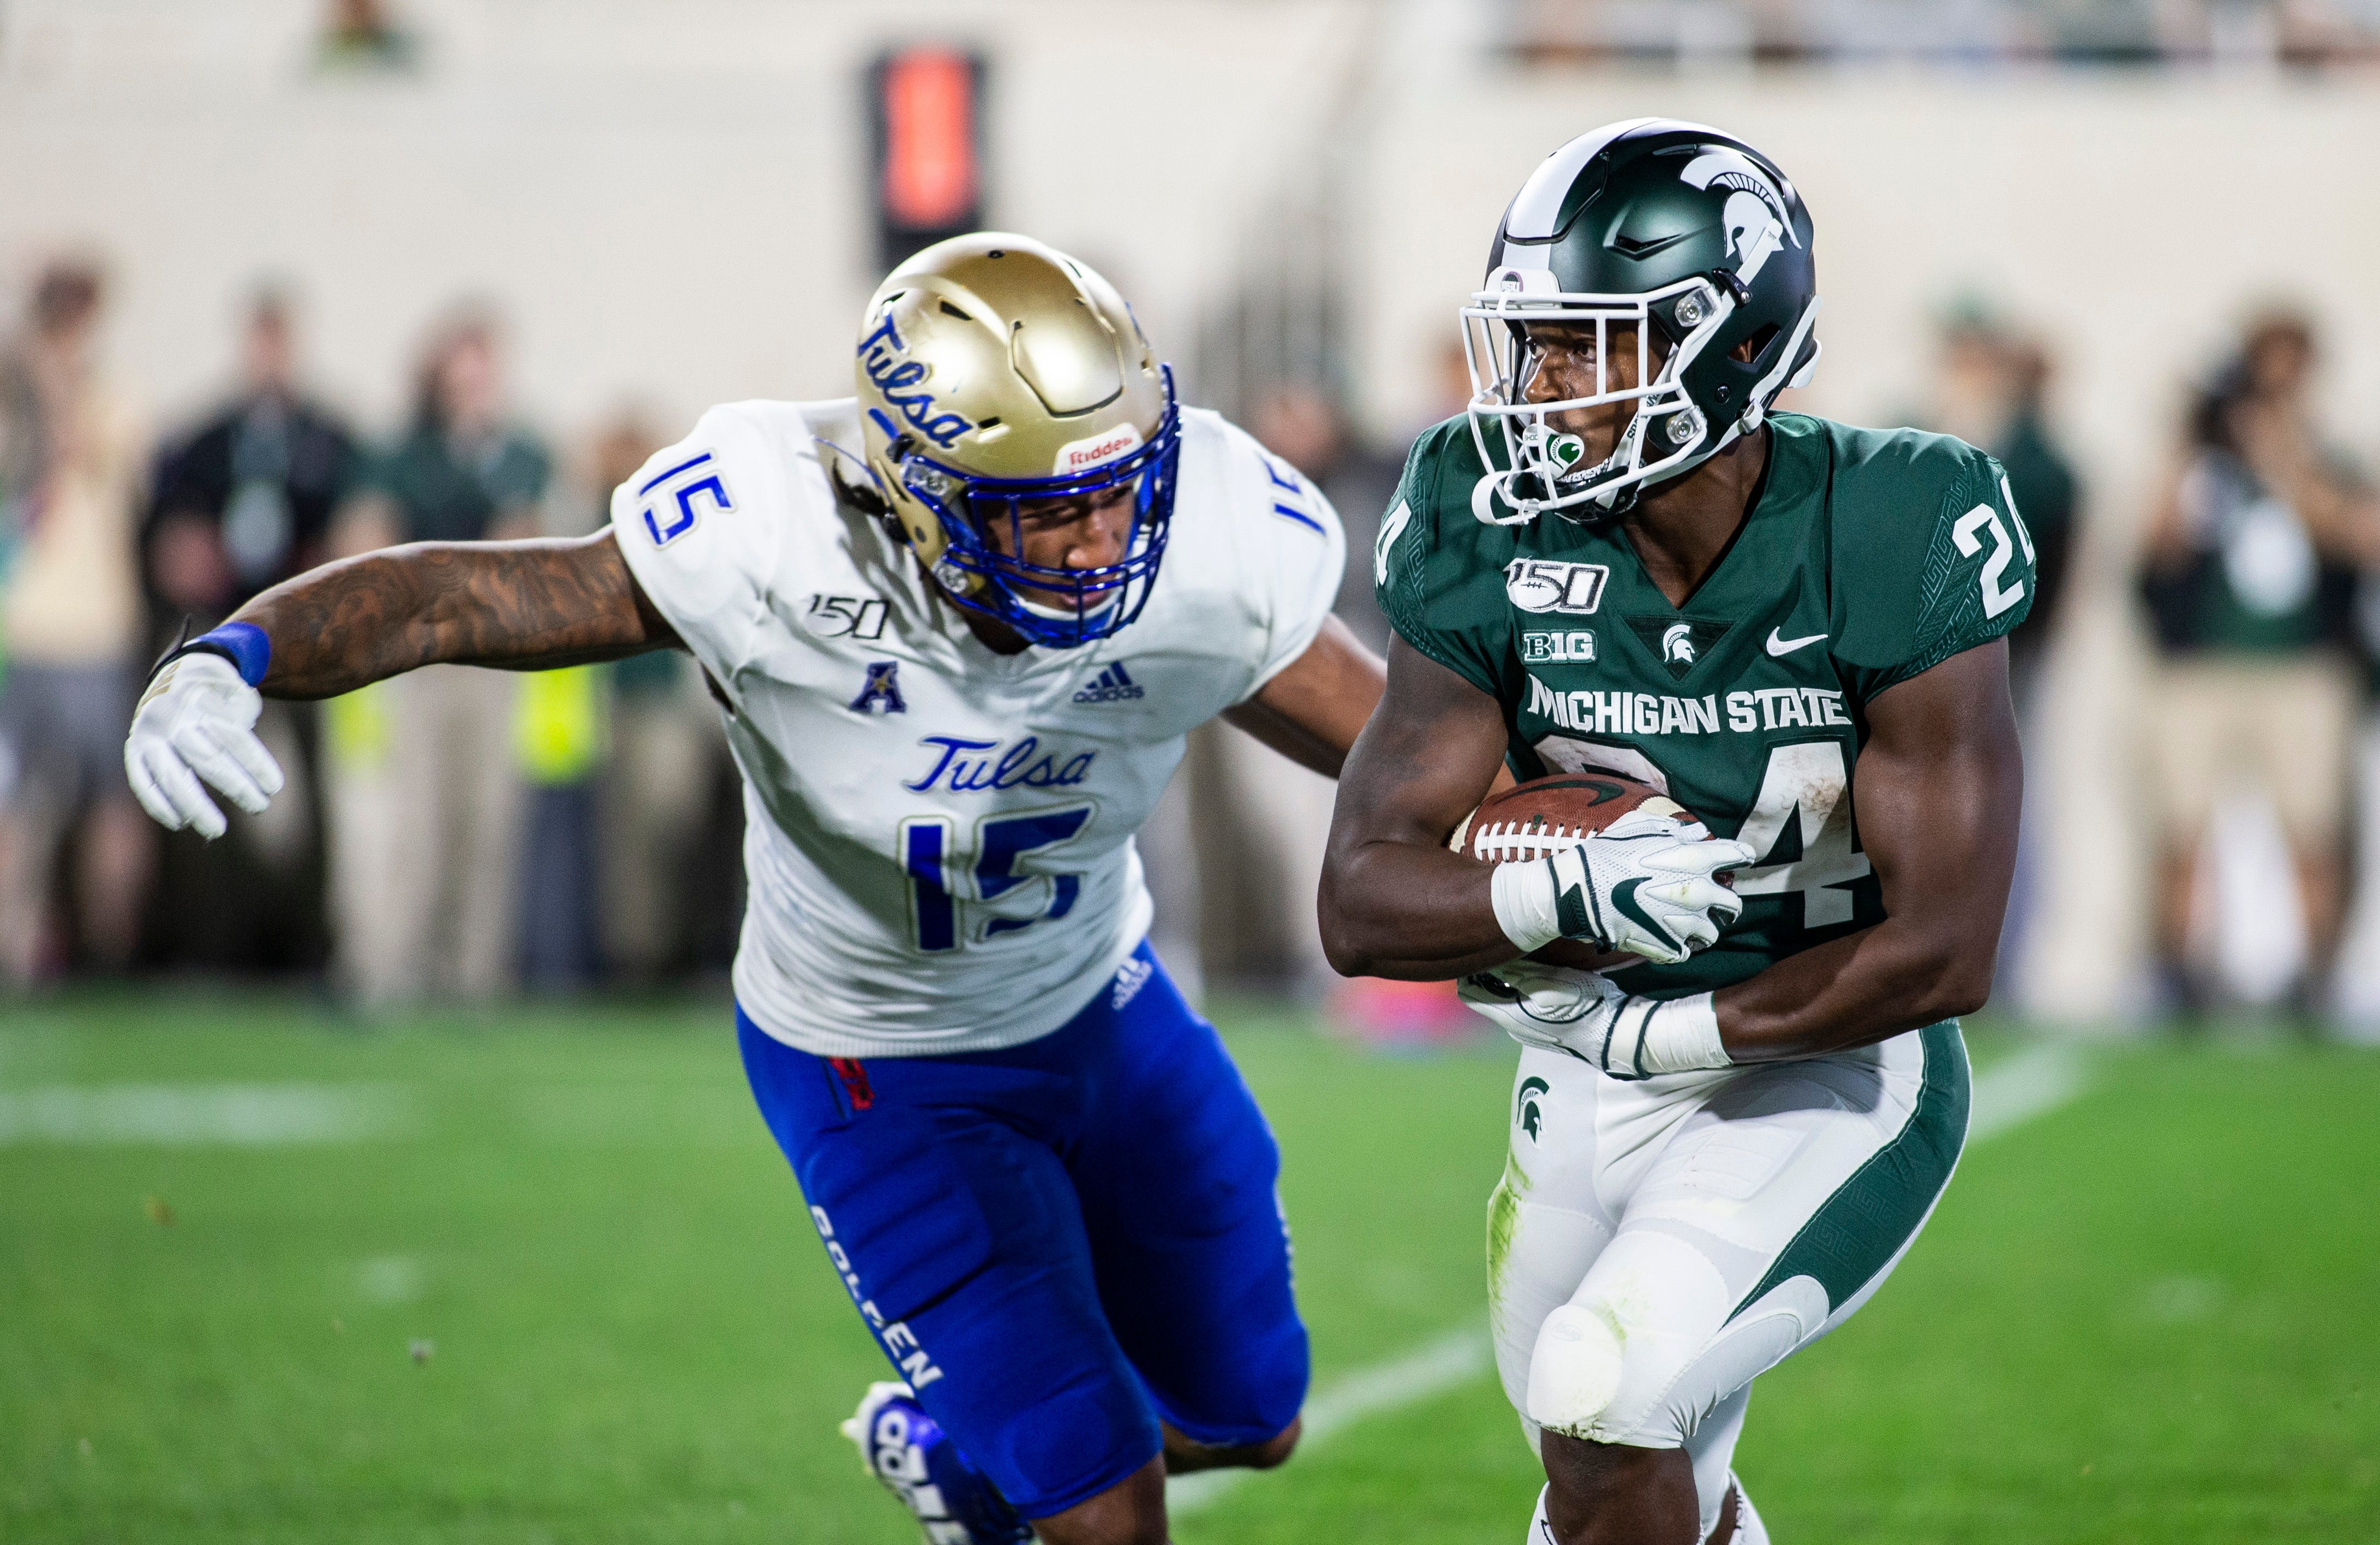 Tulsa defensive end Trevis Gipson, left, attempts a tackle Michigan State running back Elijah Collins during the second half of the season opener in East Lansing.